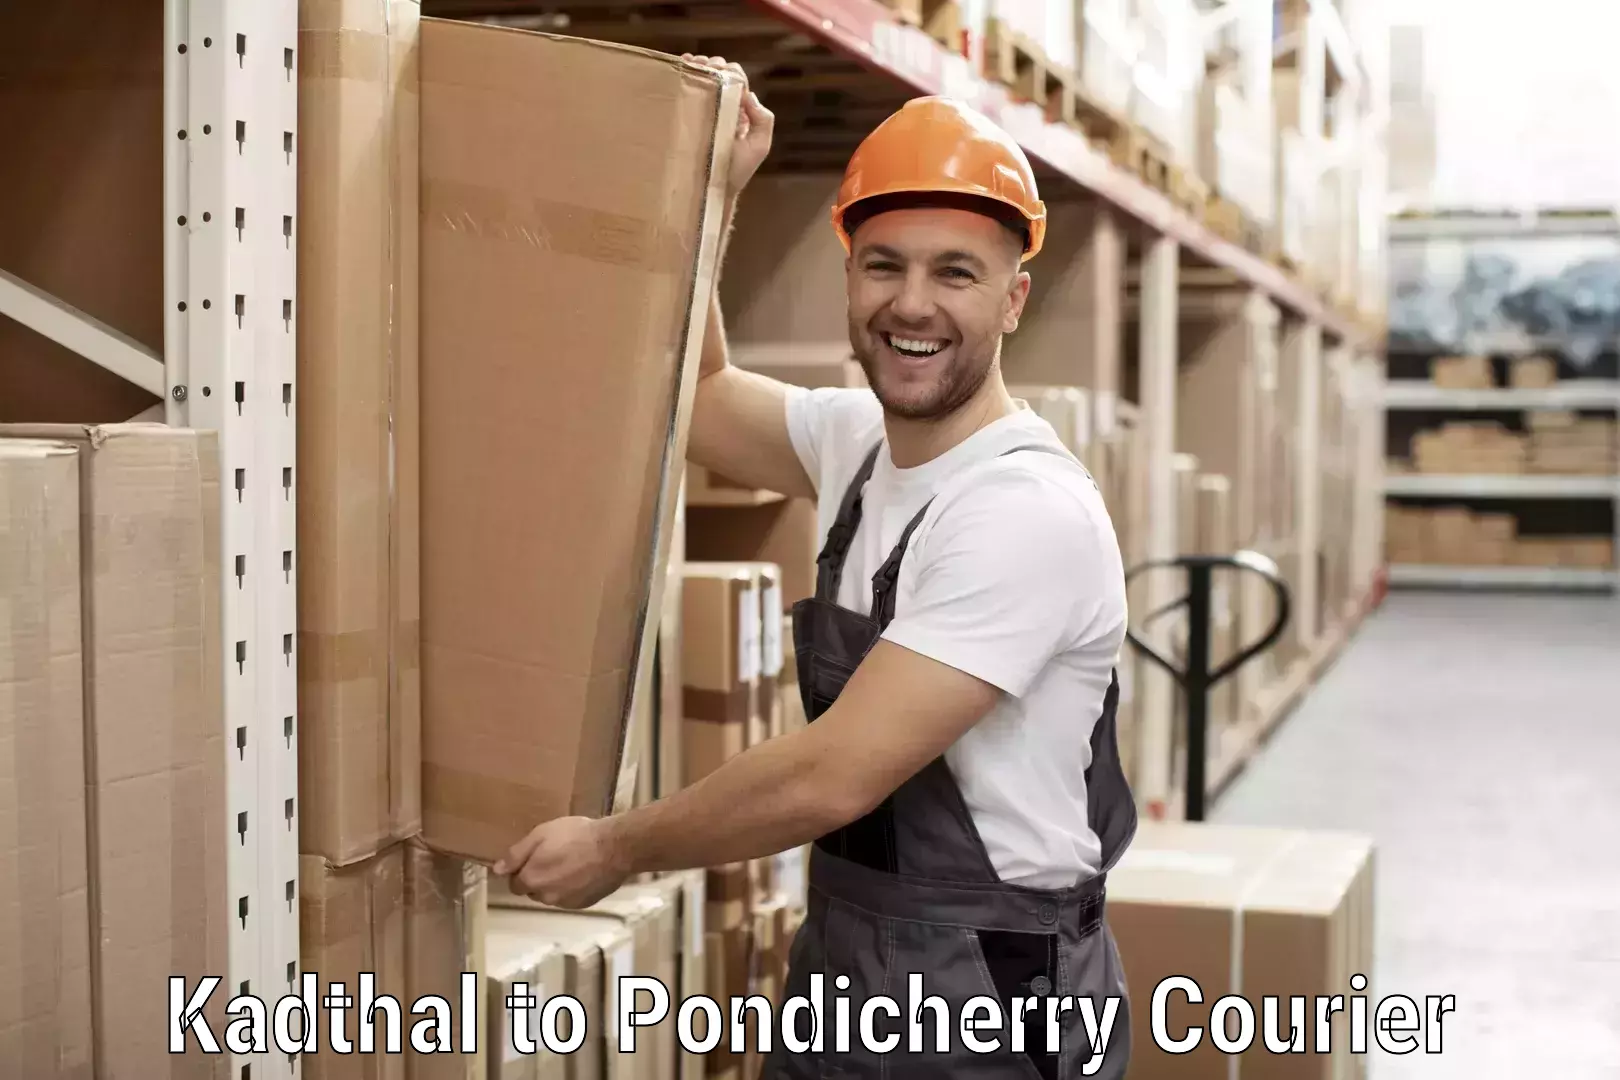 Global courier networks Kadthal to Pondicherry University